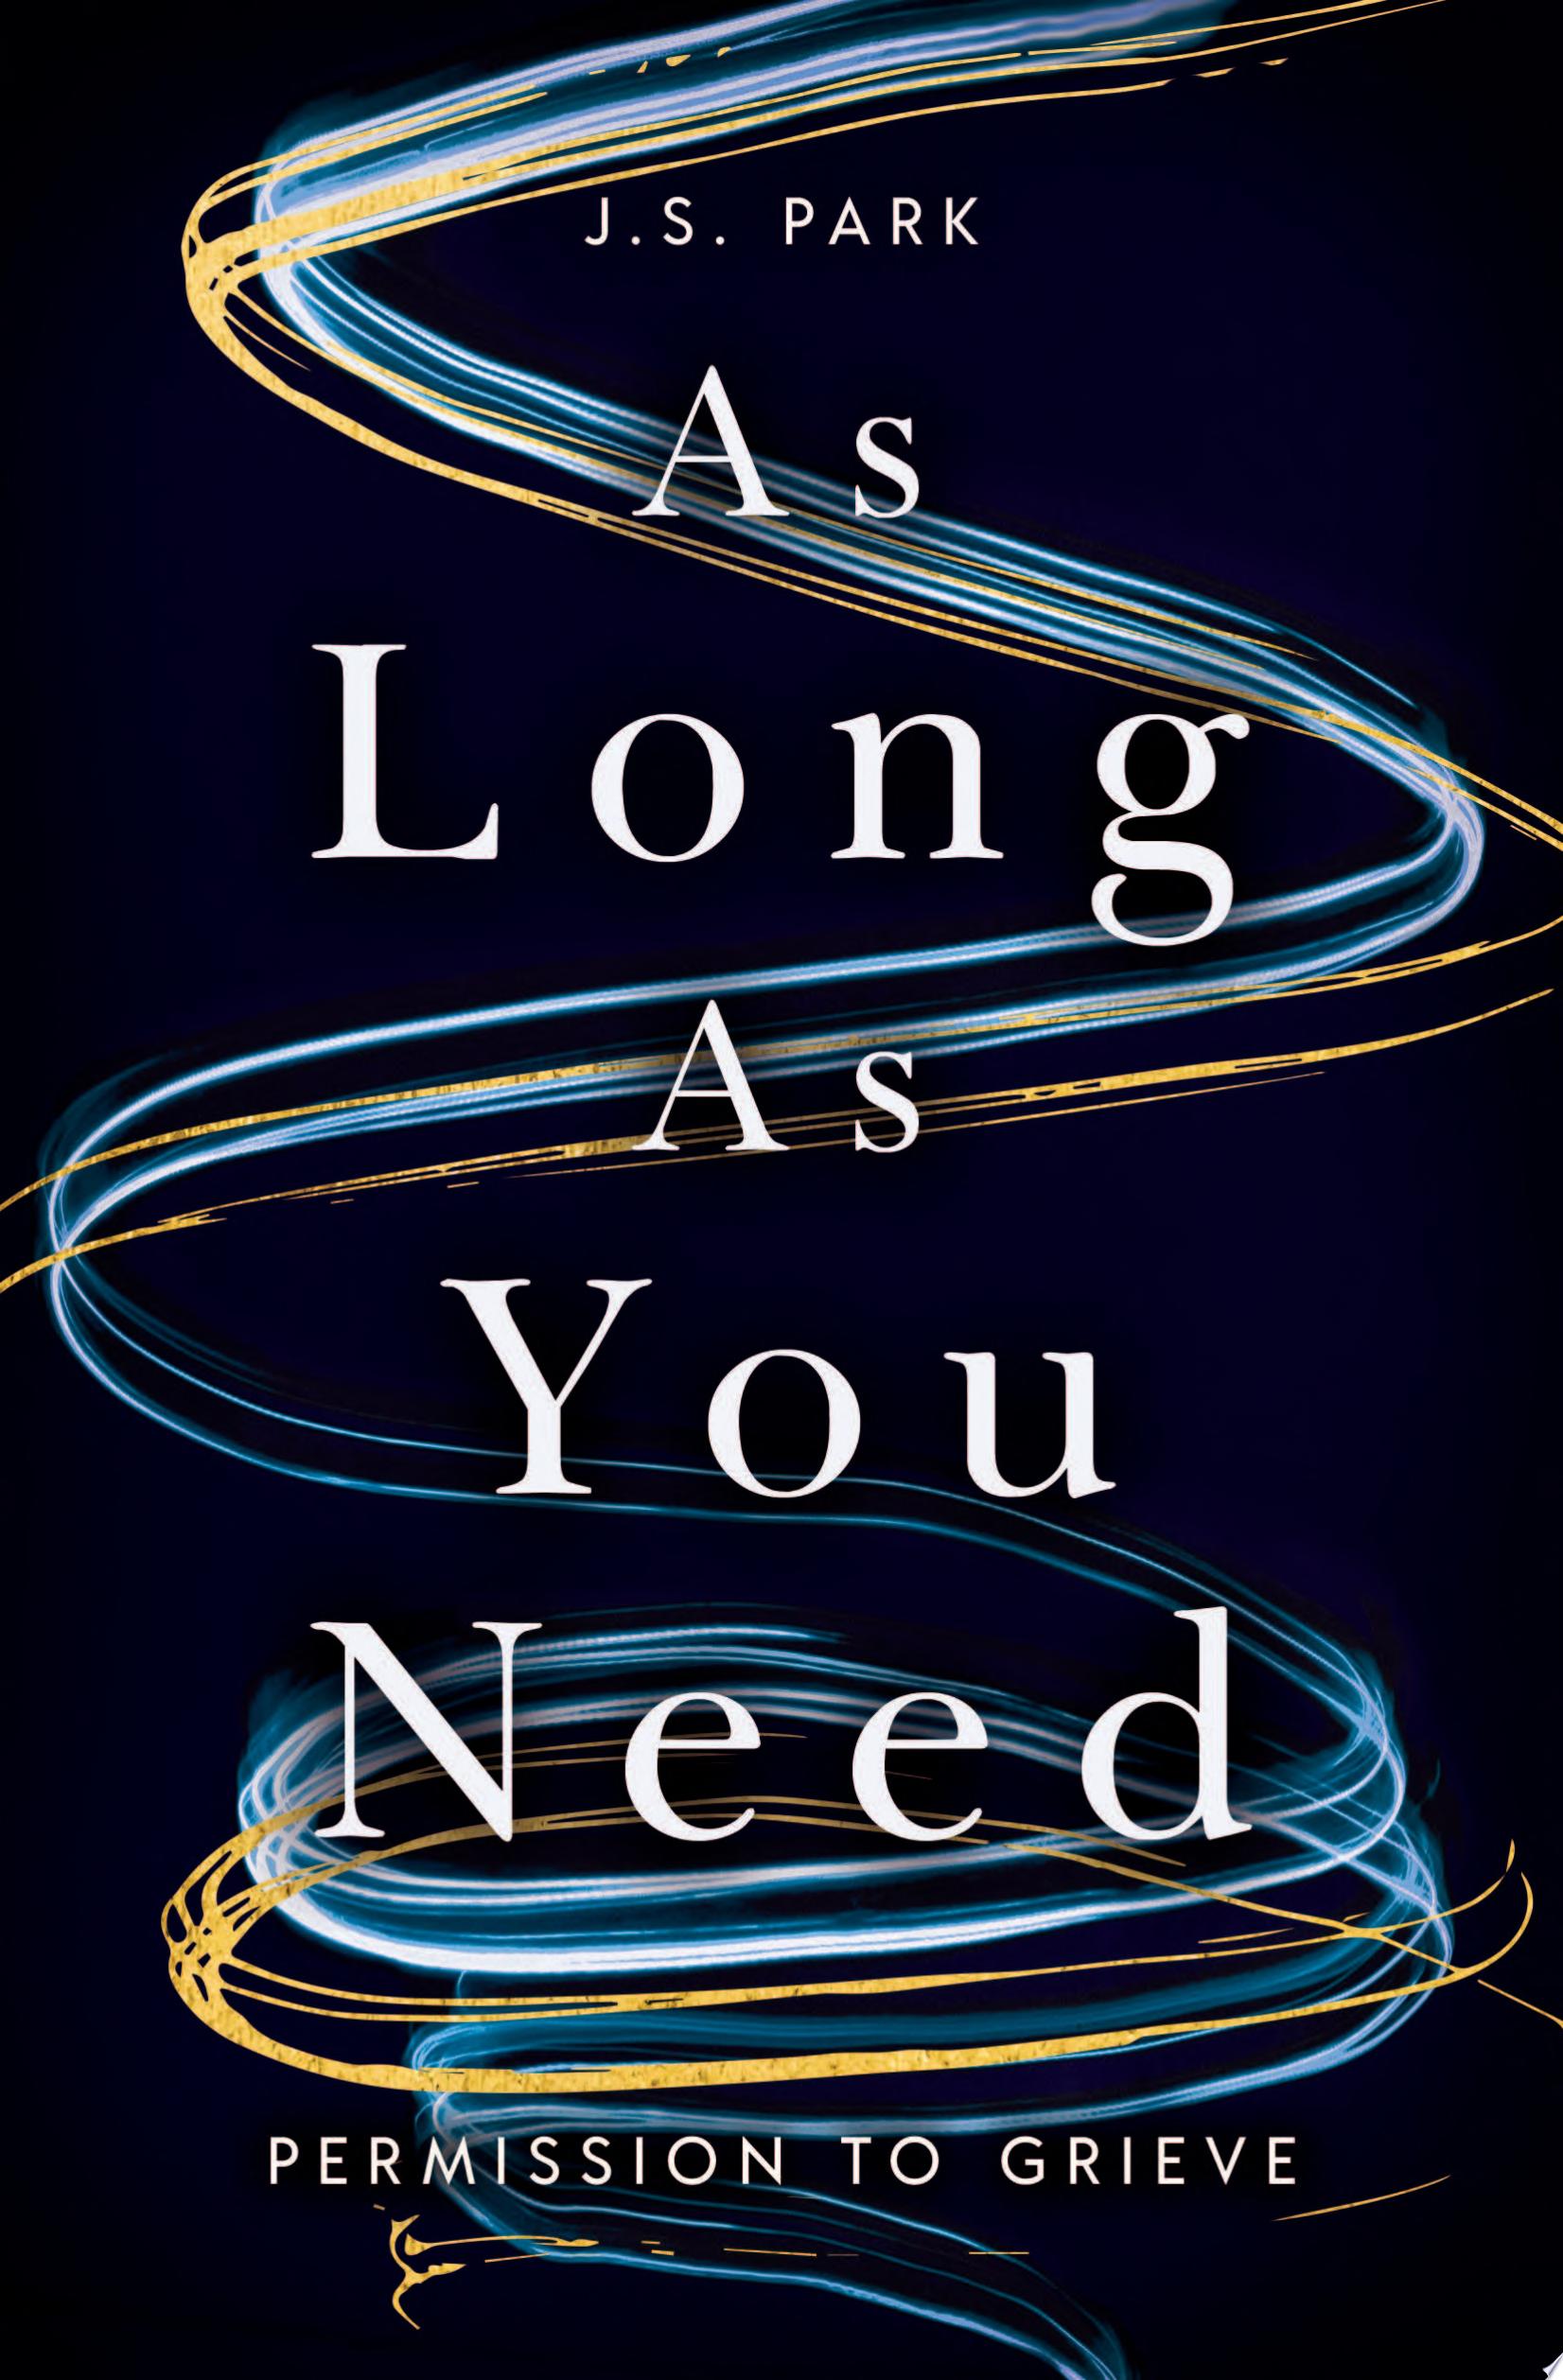 Image for "As Long as You Need"